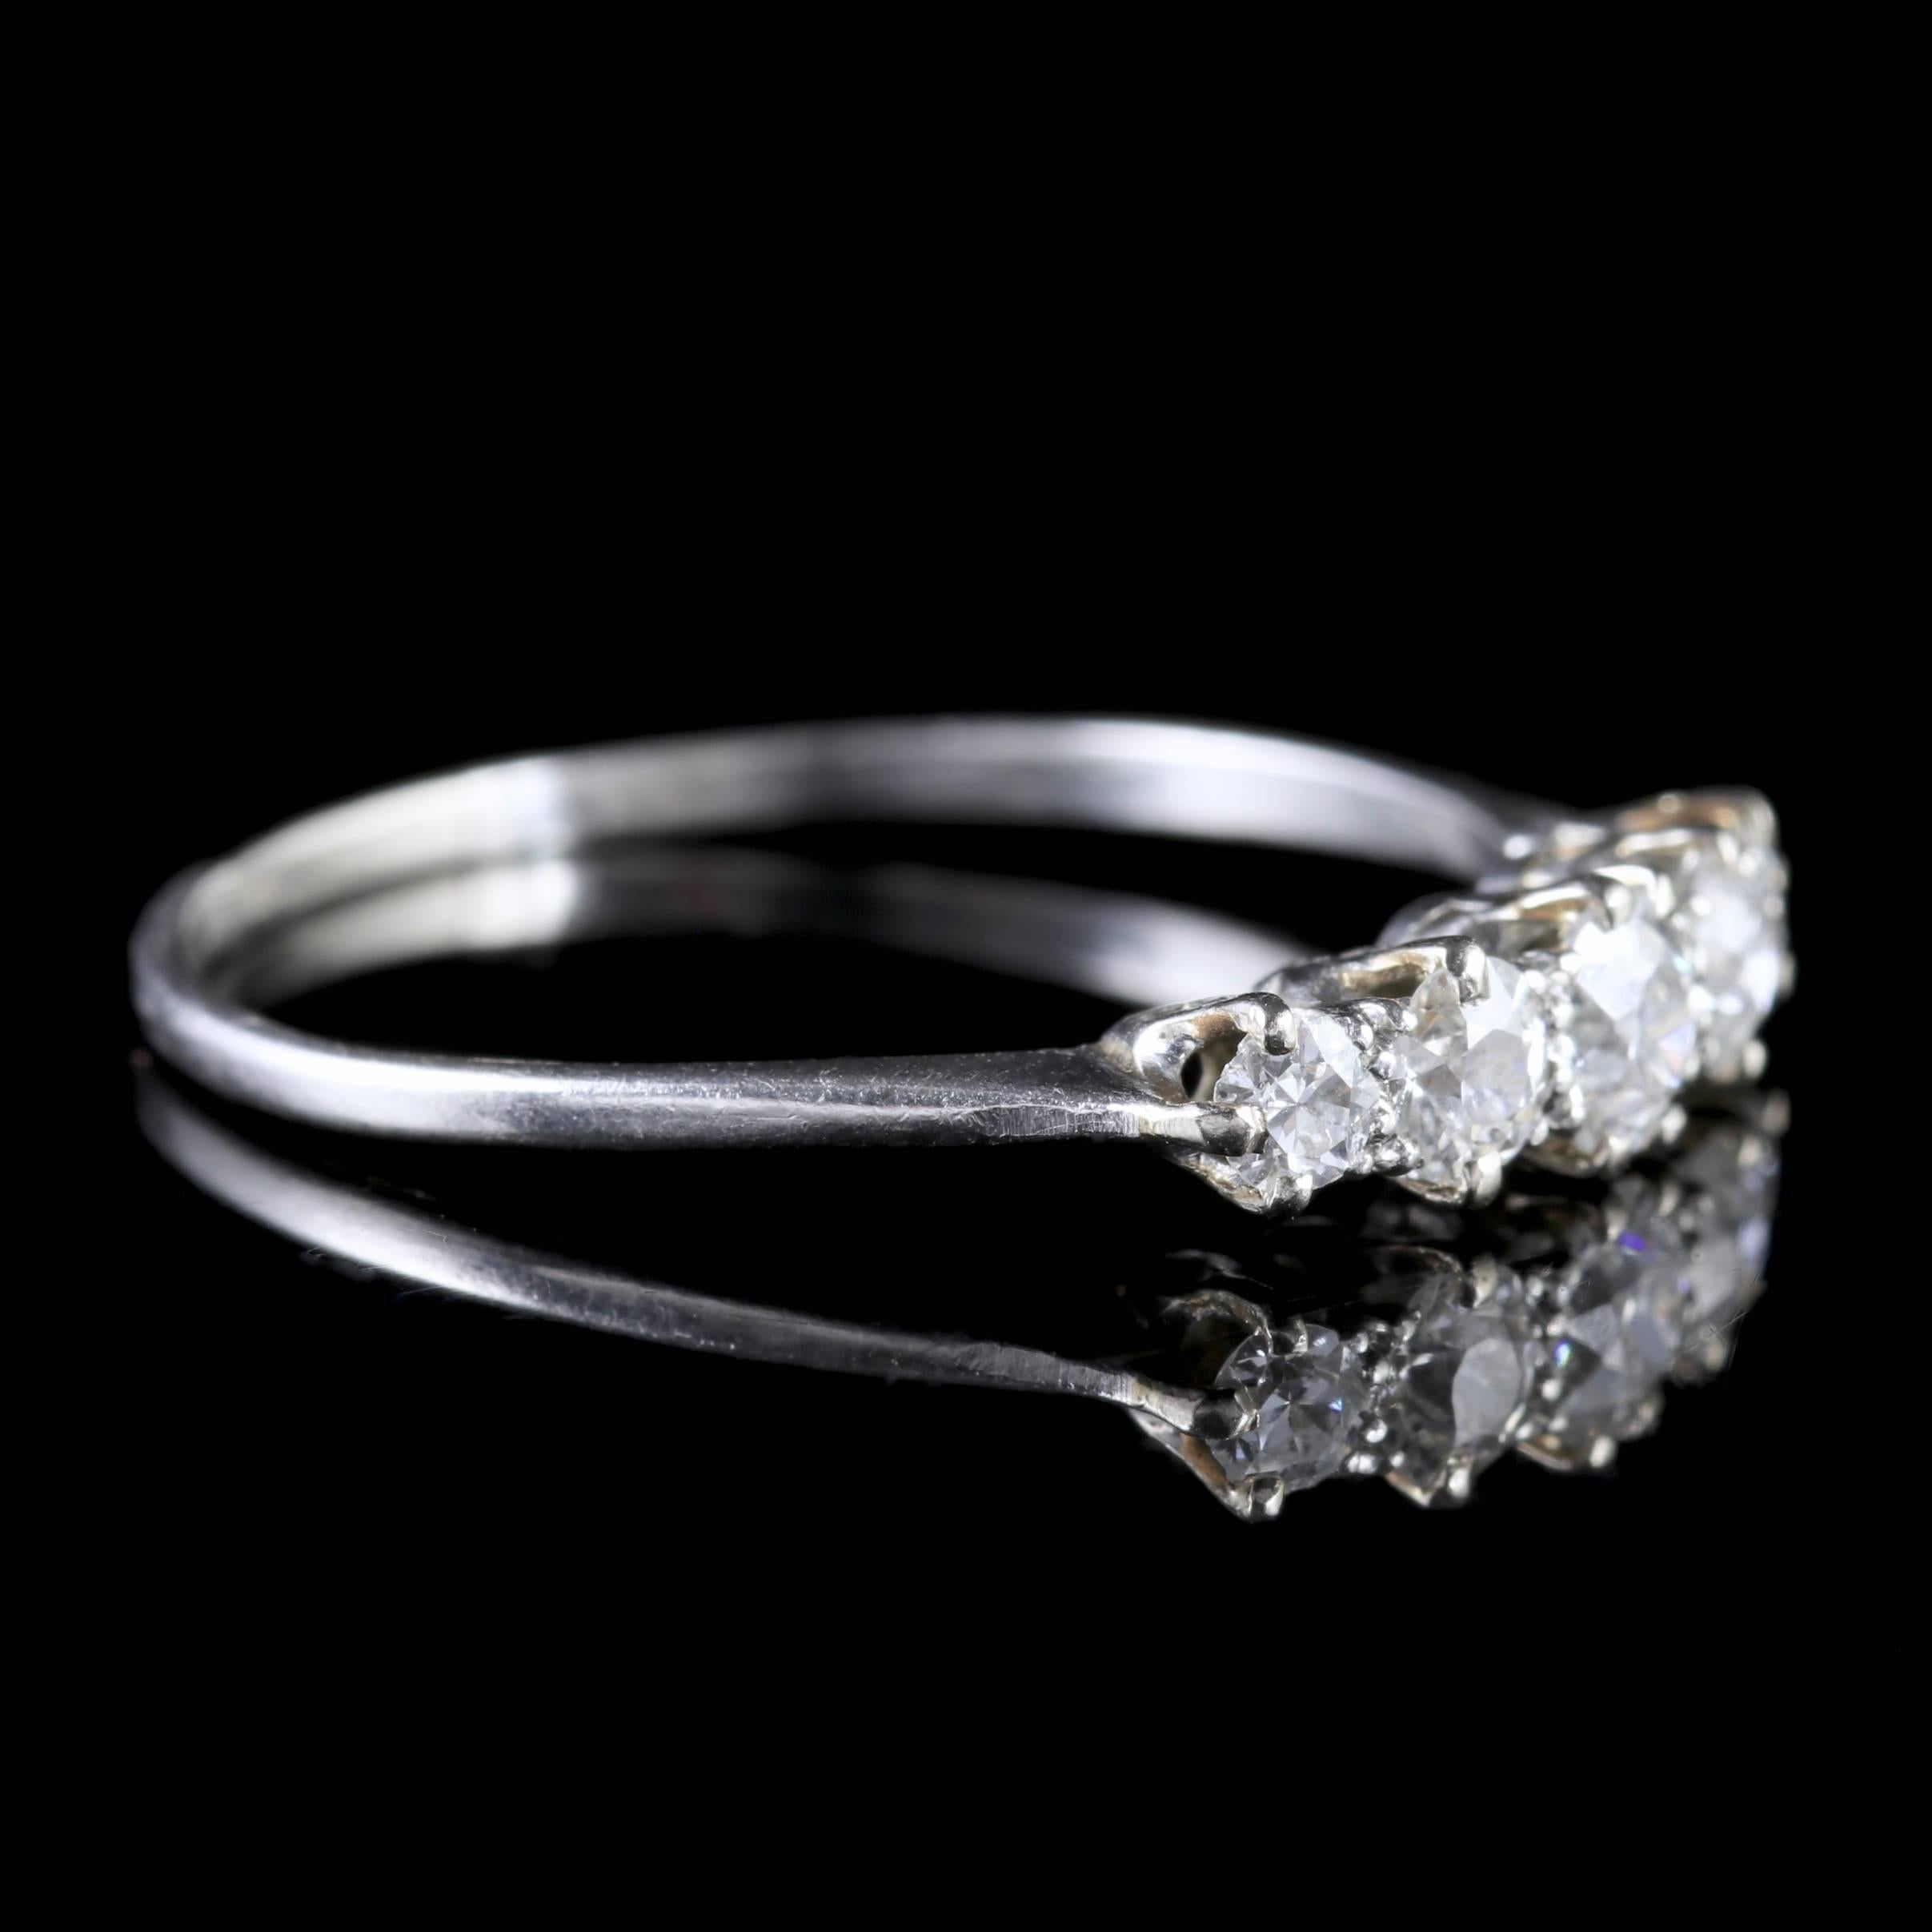 Antique Edwardian Five-Stone Diamond Eternity Ring 18 Carat White Gold In Excellent Condition In Lancaster, Lancashire